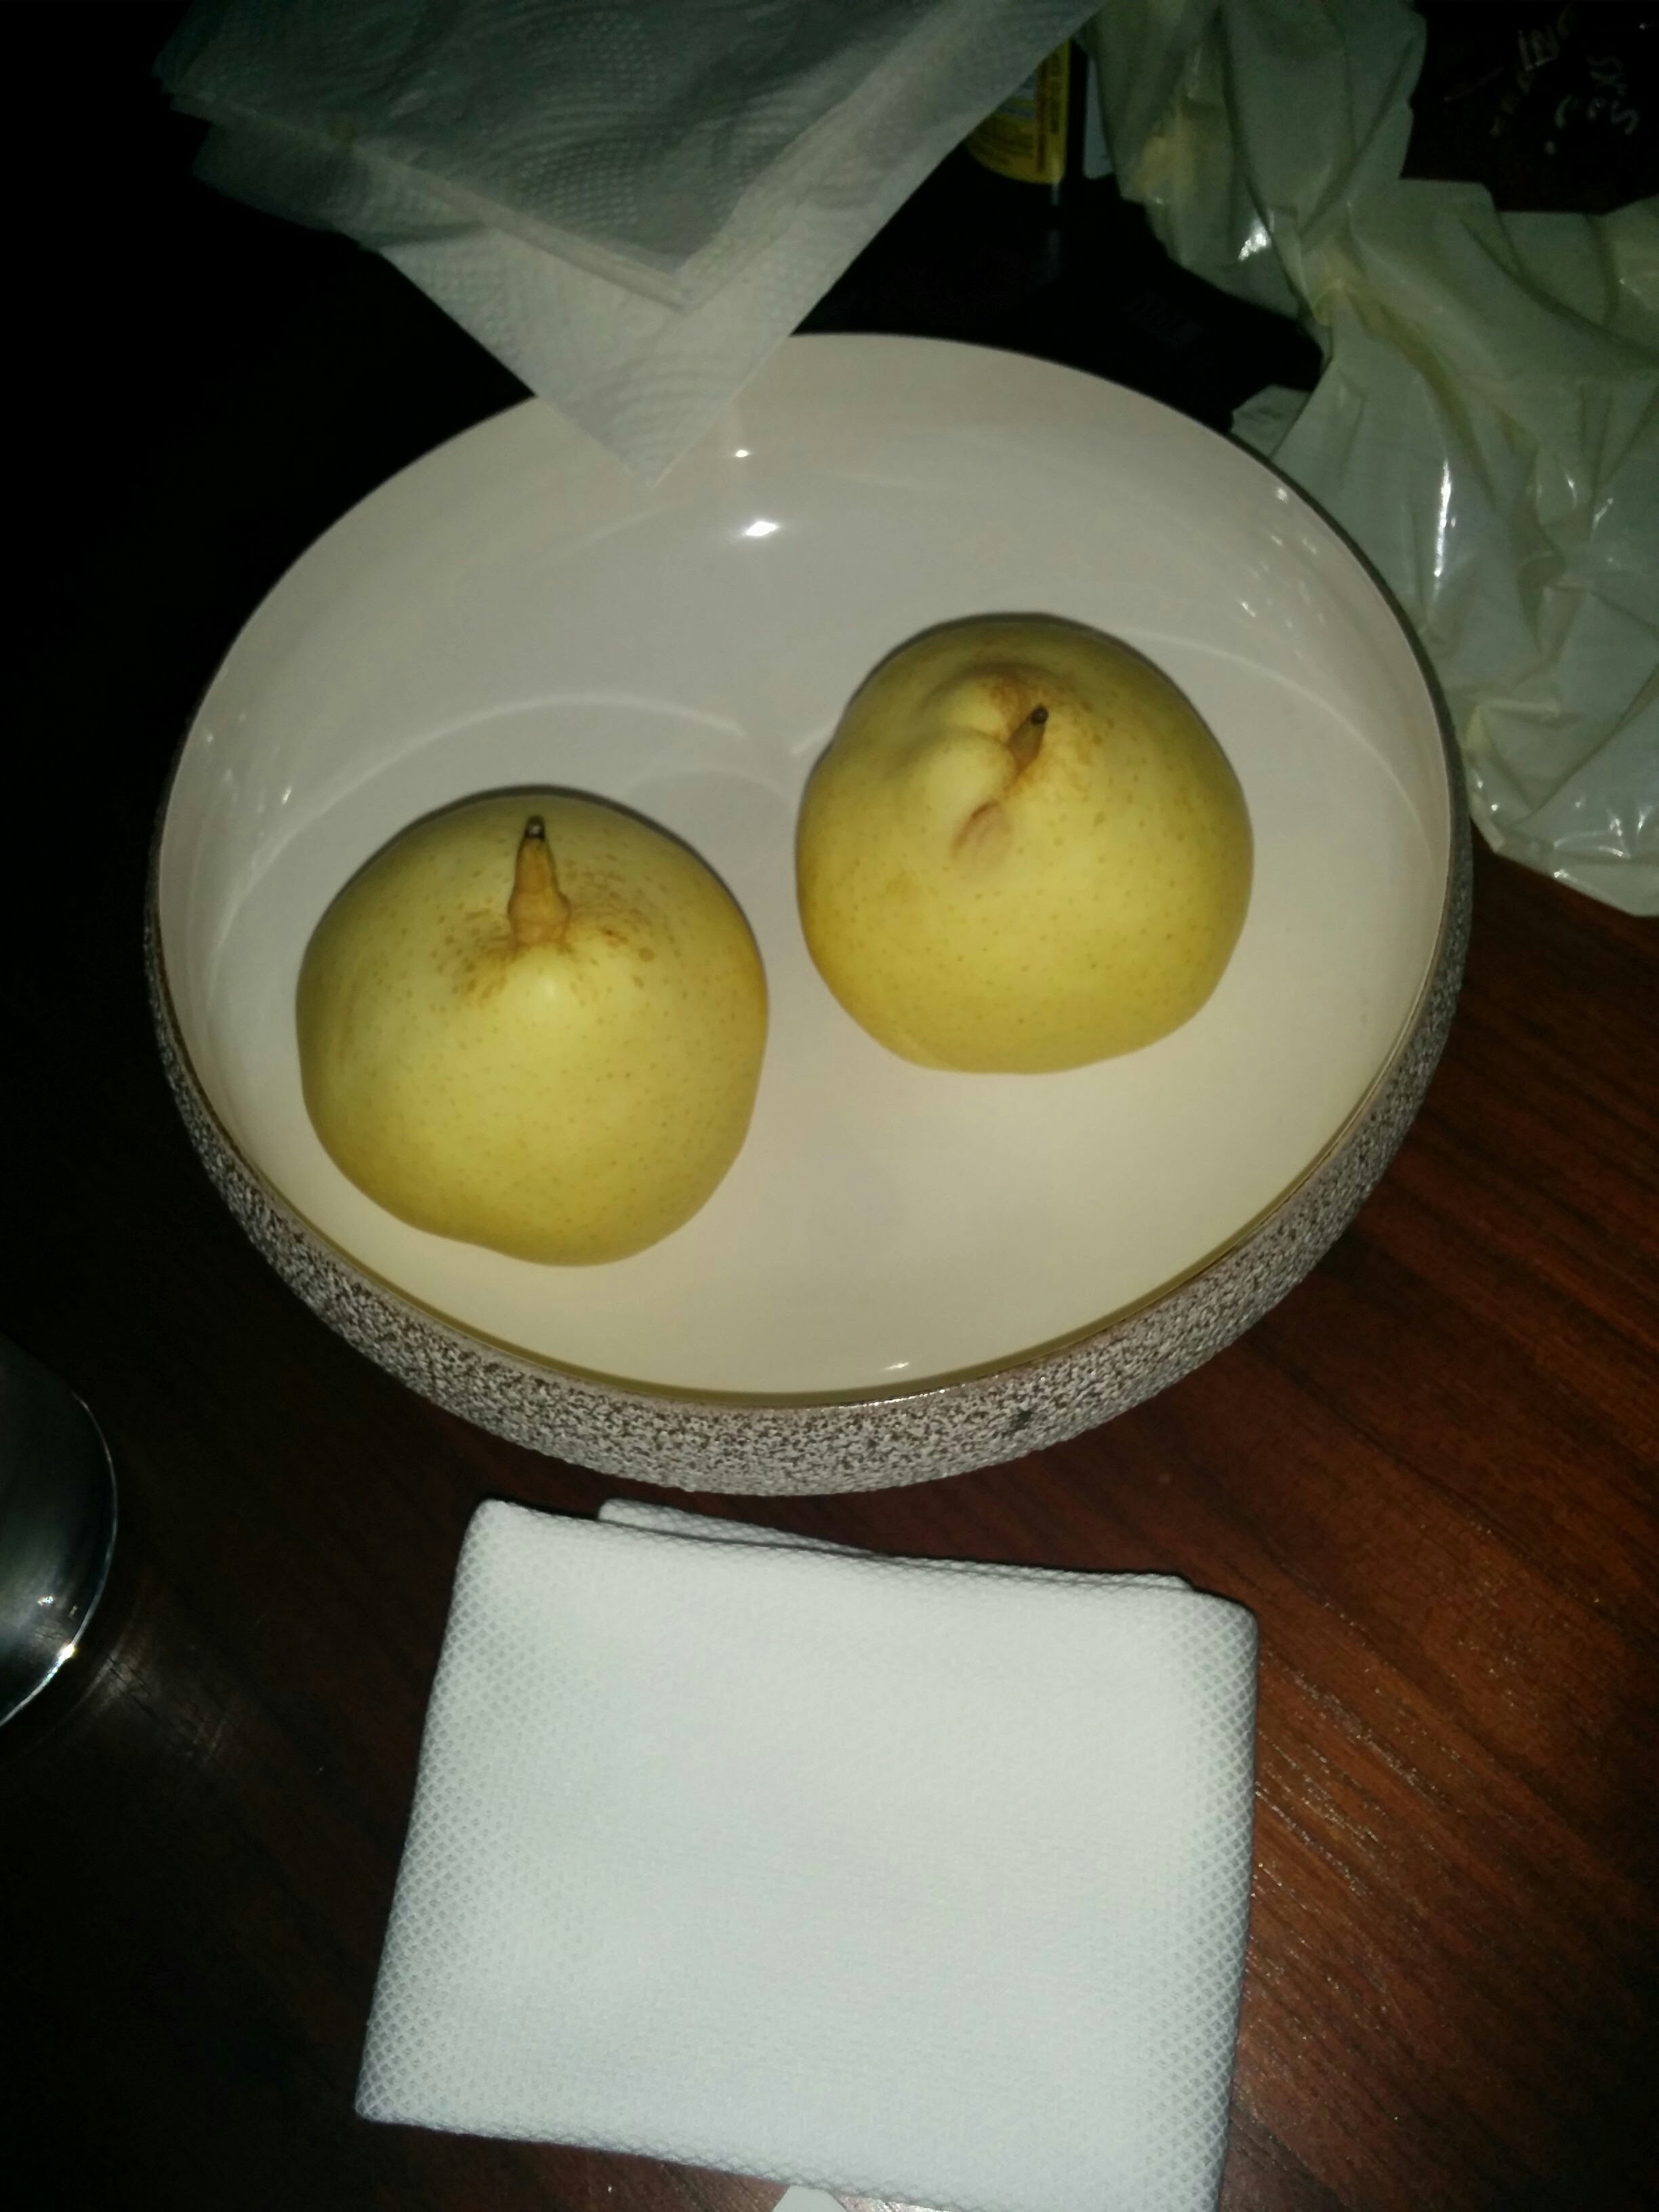 Asian pears - they were amazing!